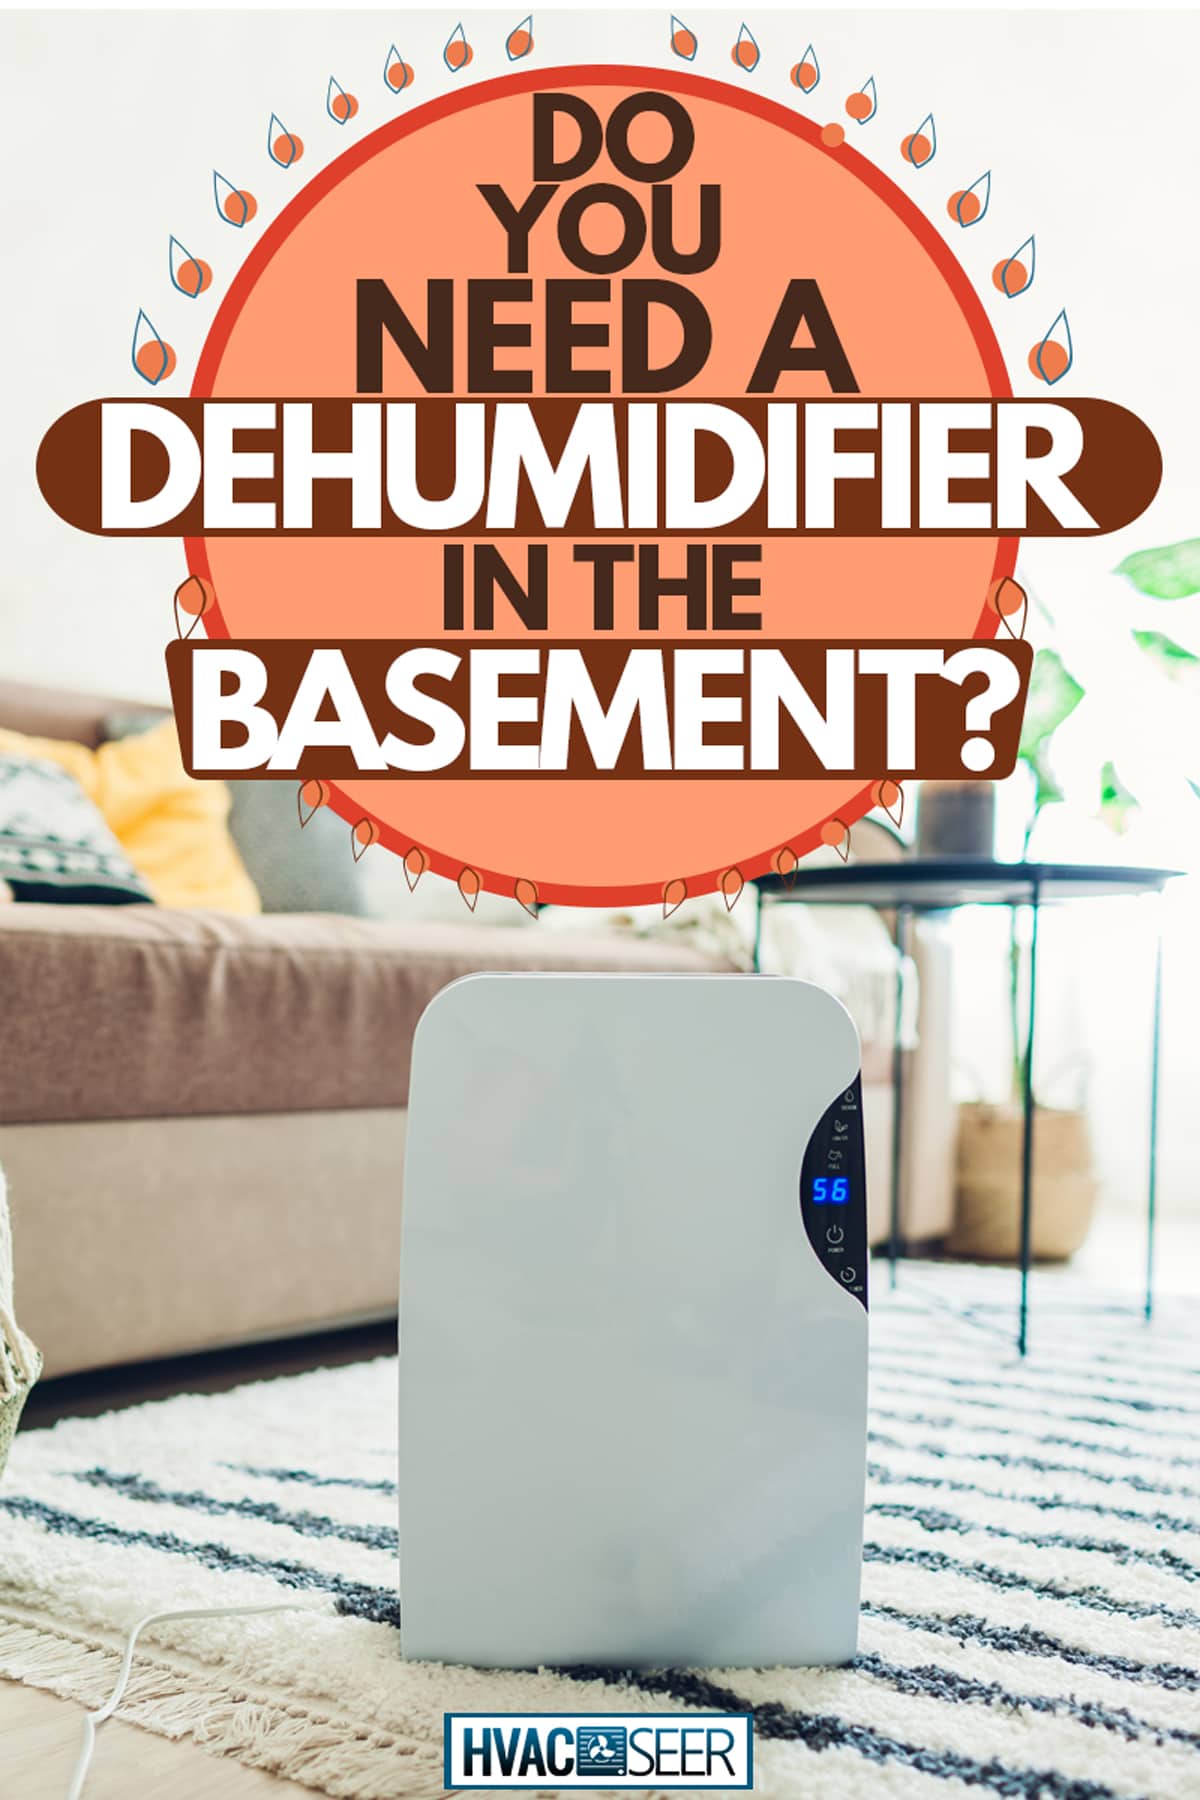 A Dehumidifier on a basement placed on top of a checkered rug, Do You Need a Dehumidifier in the Basement?